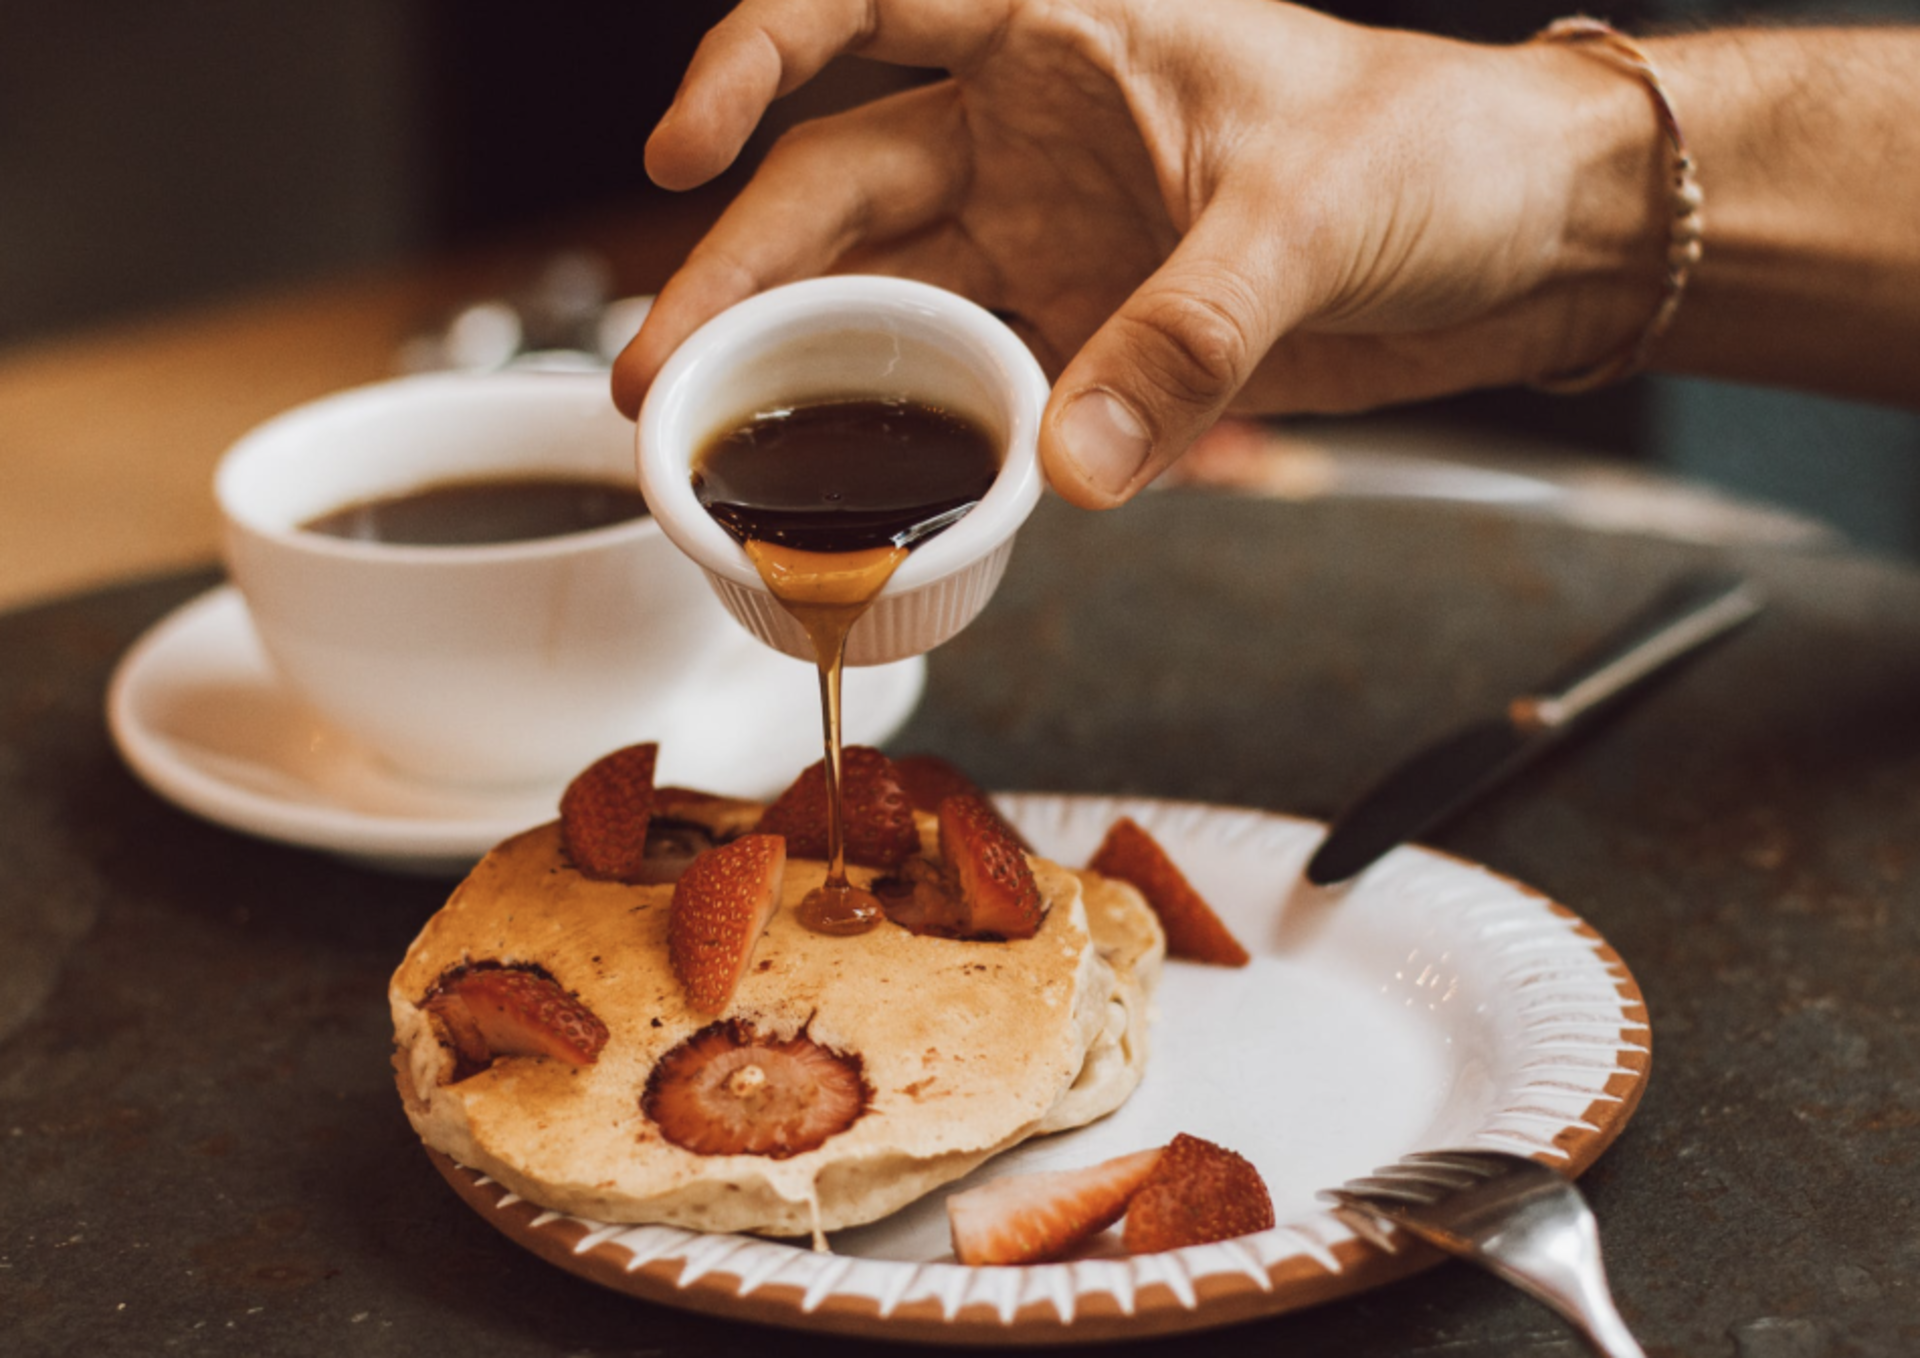 Maple syrup is a classic Canadian treat, but is it good for you?